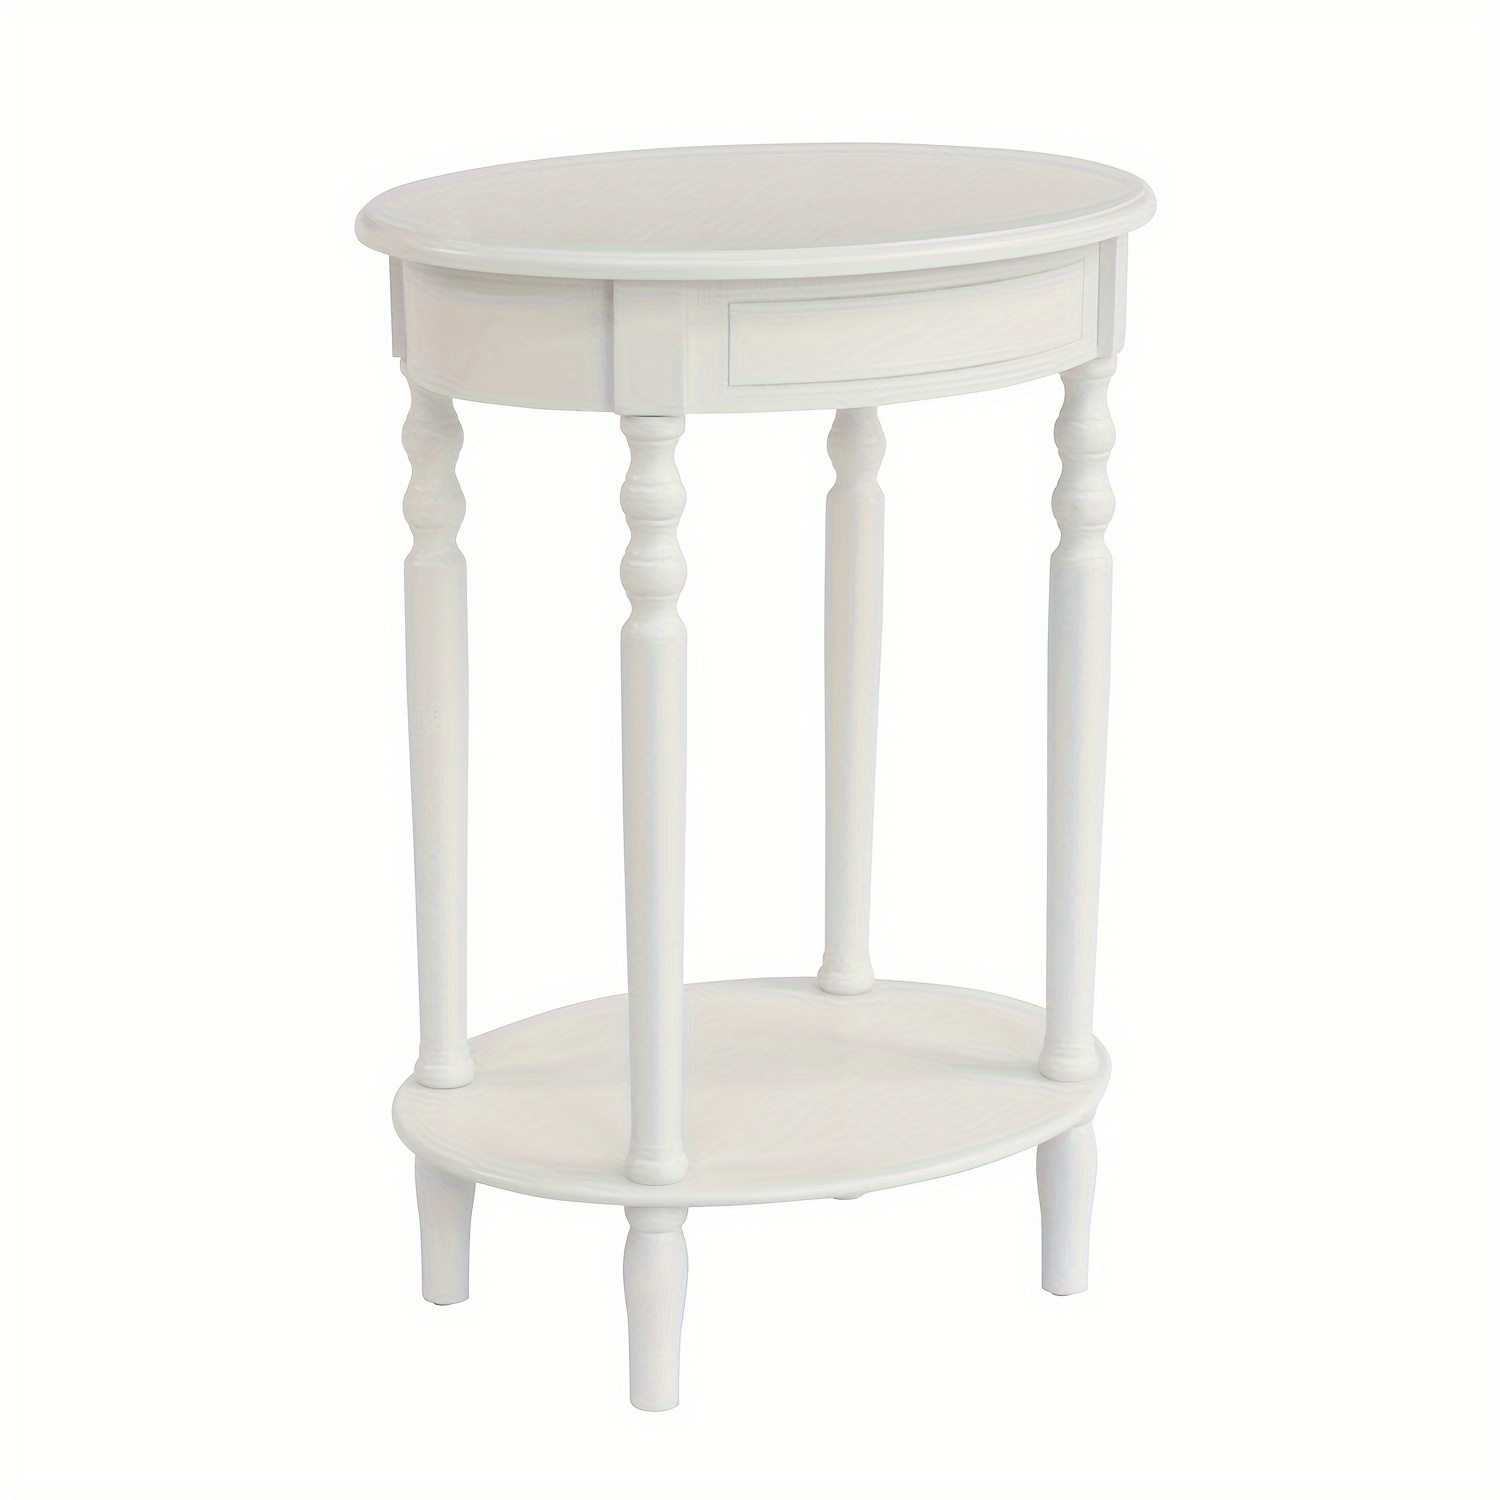 

Oval Wood Shelf Accent Table, 27 In H X 19.5 In W X 15.5 In D, Antique White